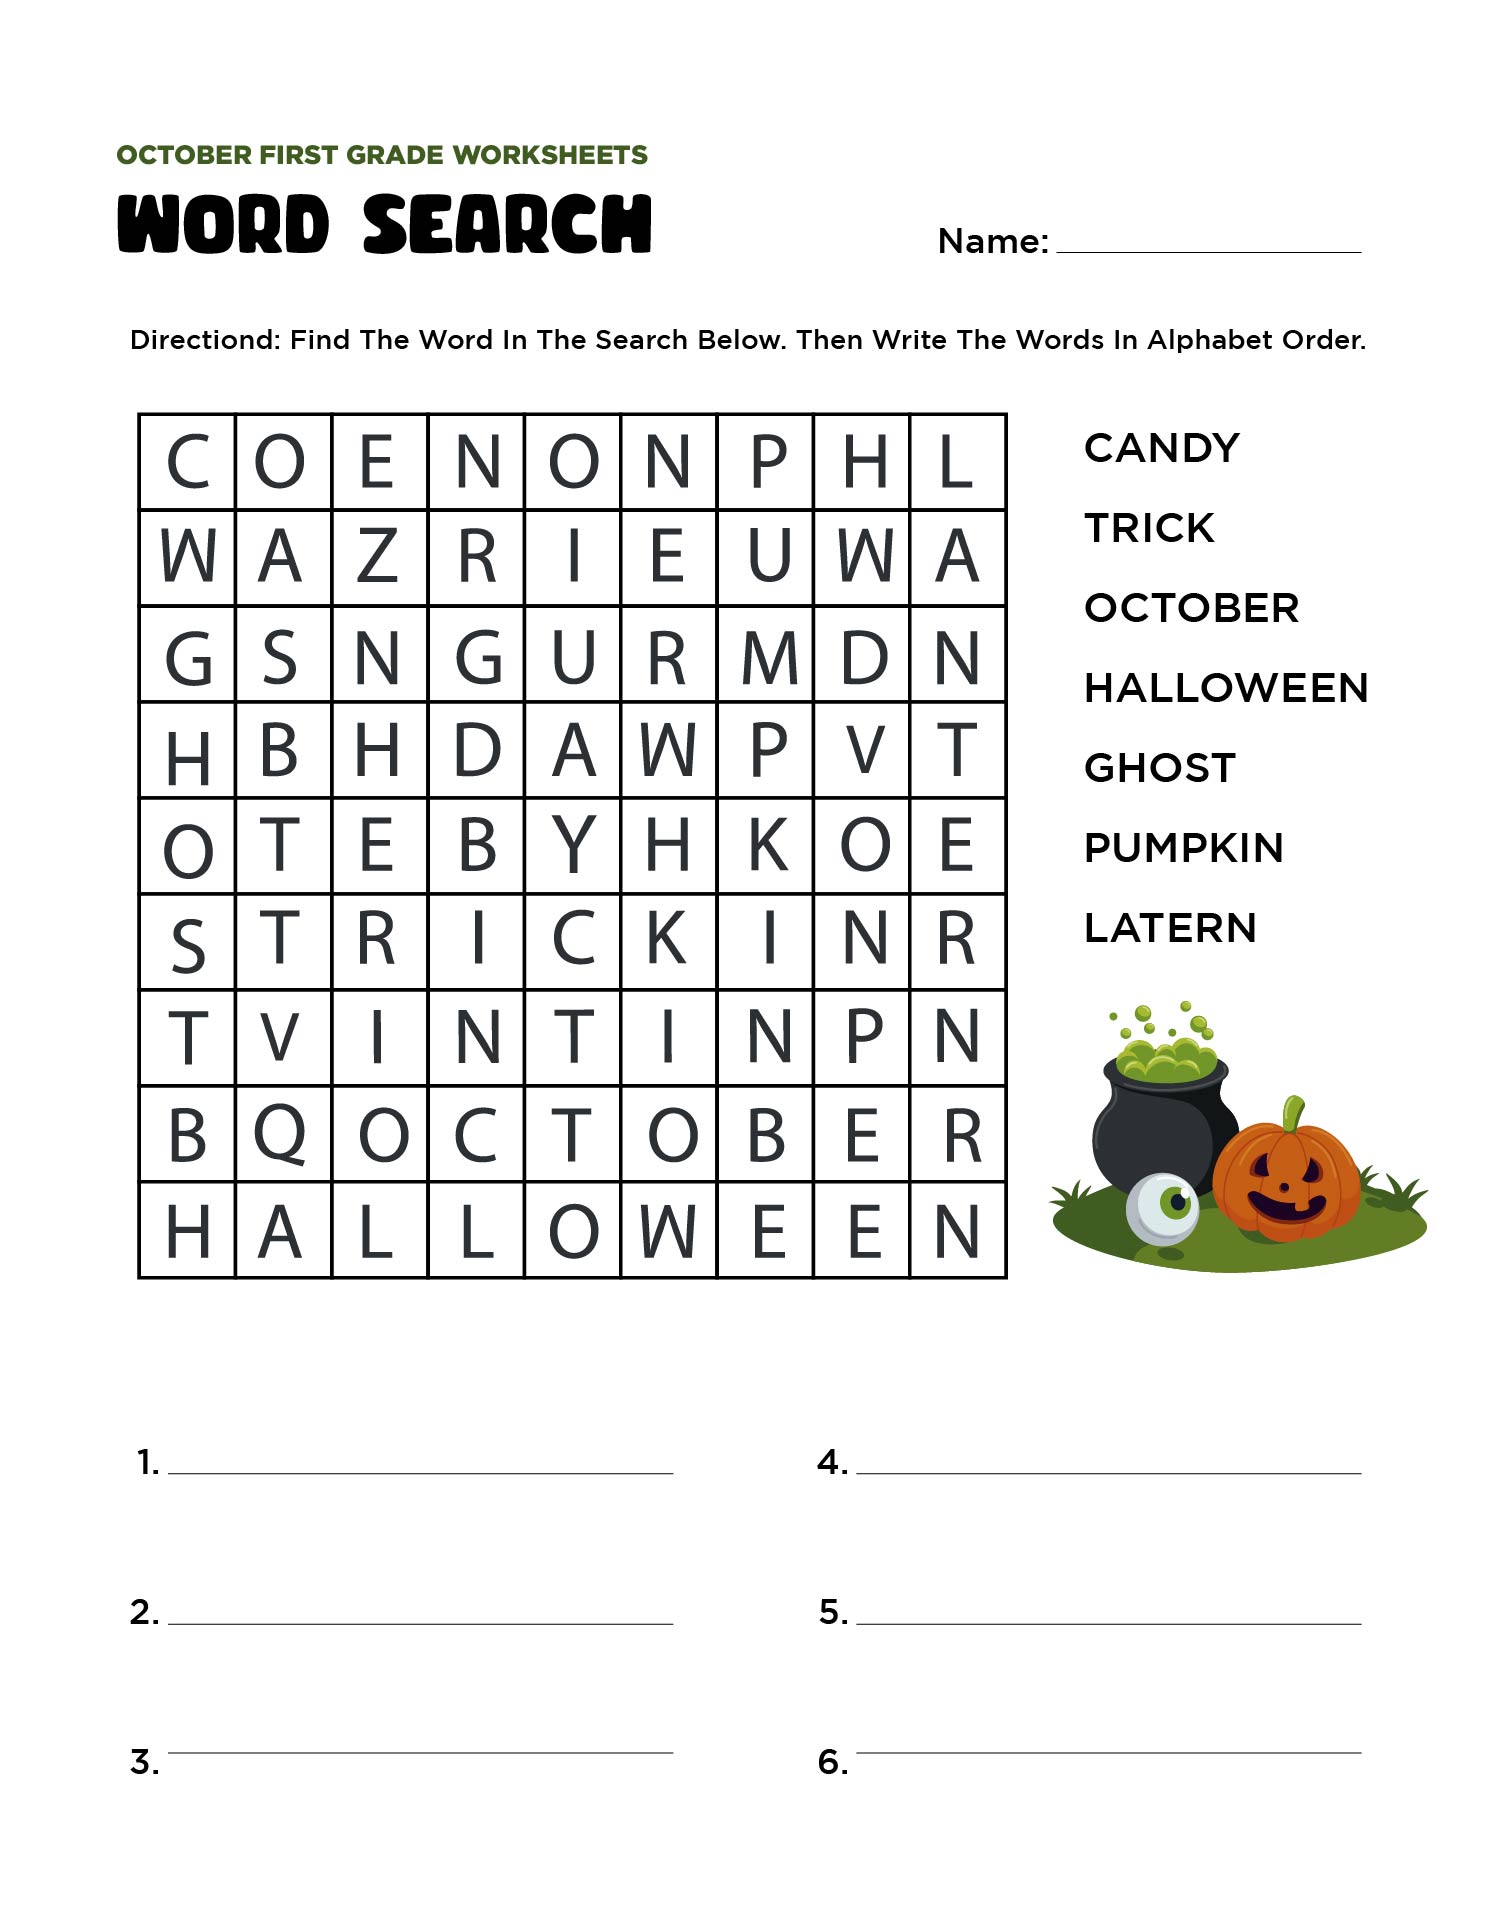 October First Grade Worksheets Halloween Word Search Printable